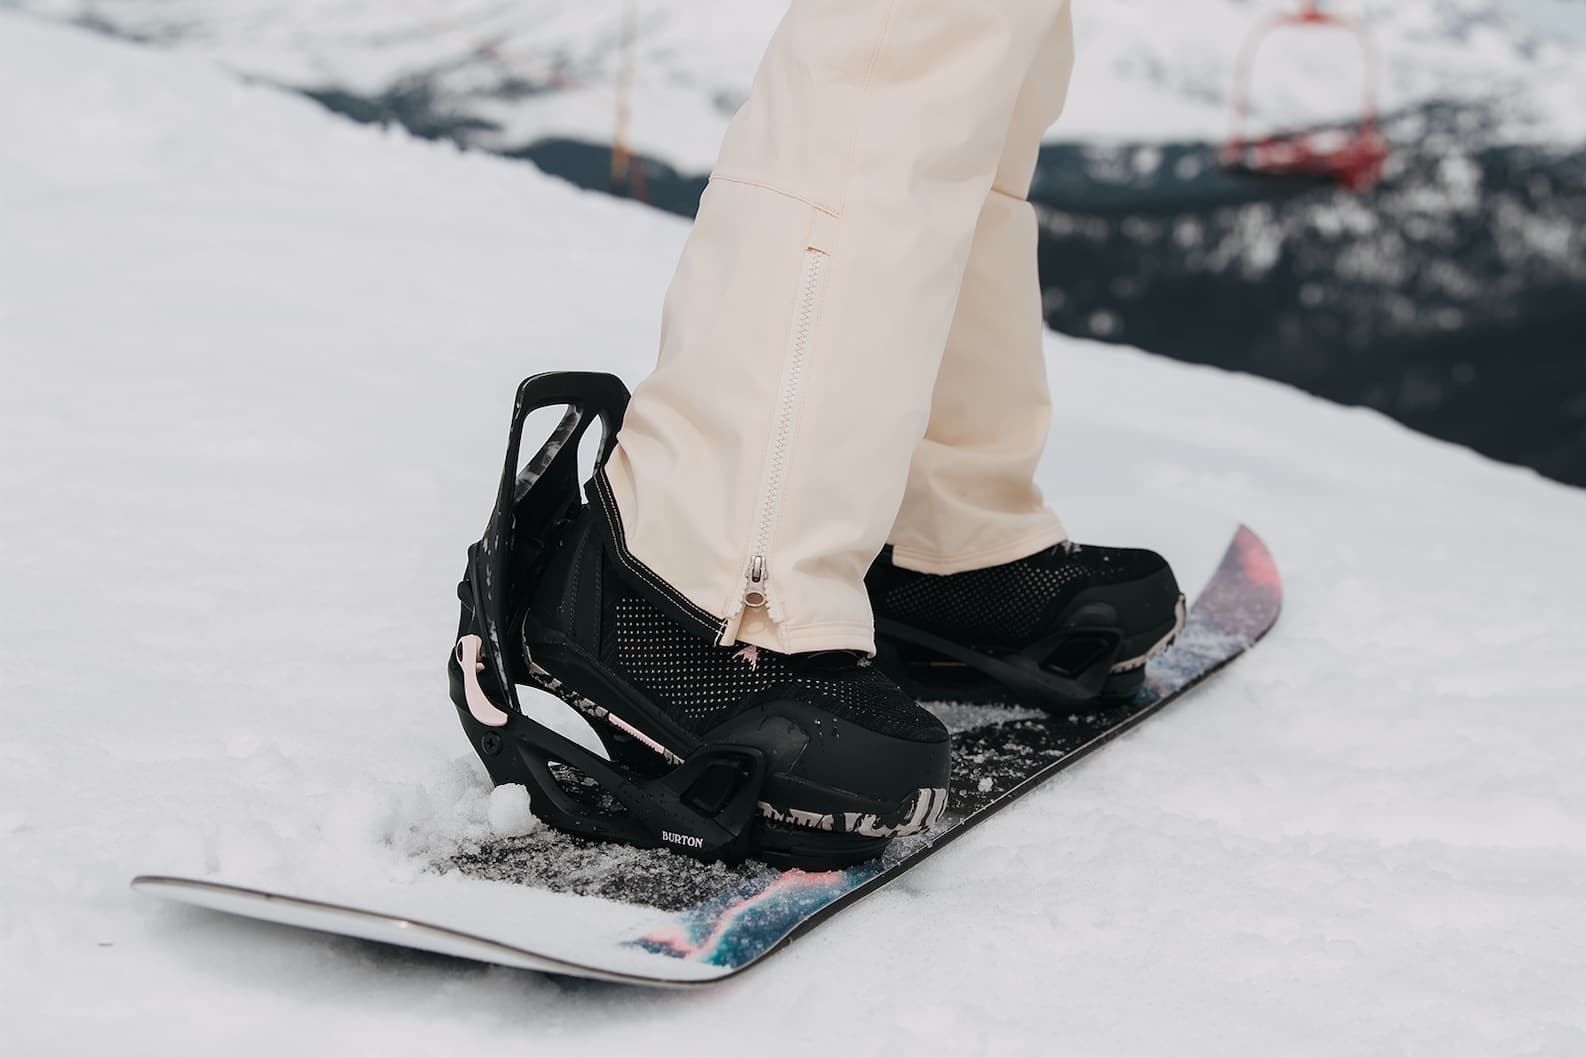 pick Nomination Festival Burton Step On® Bindings: Everything You Need to Know | Burton Snowboards